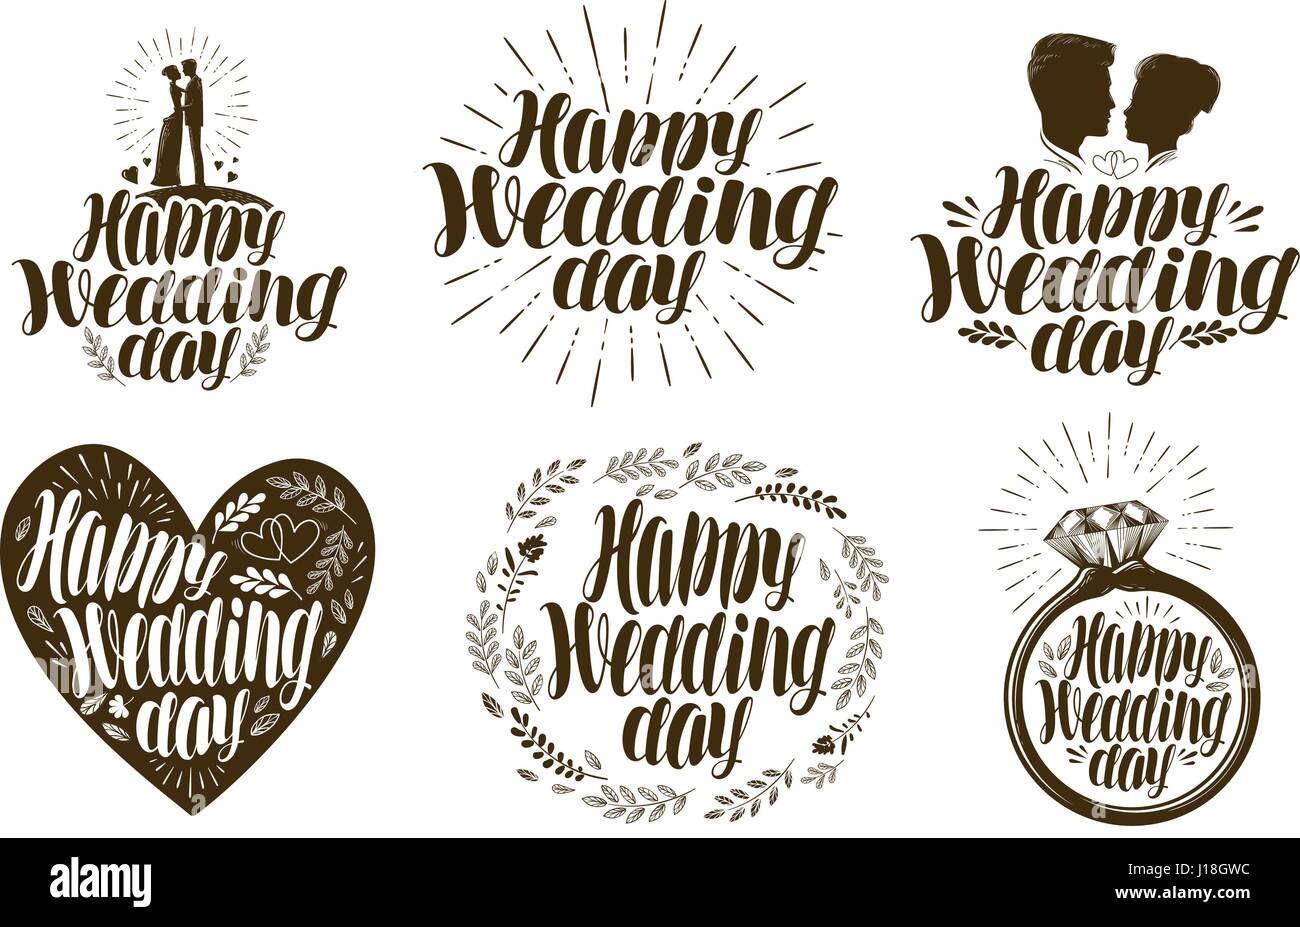 Happy Wedding day, label set. Married couple, love icon or logo. Lettering vector illustration Stock Vector